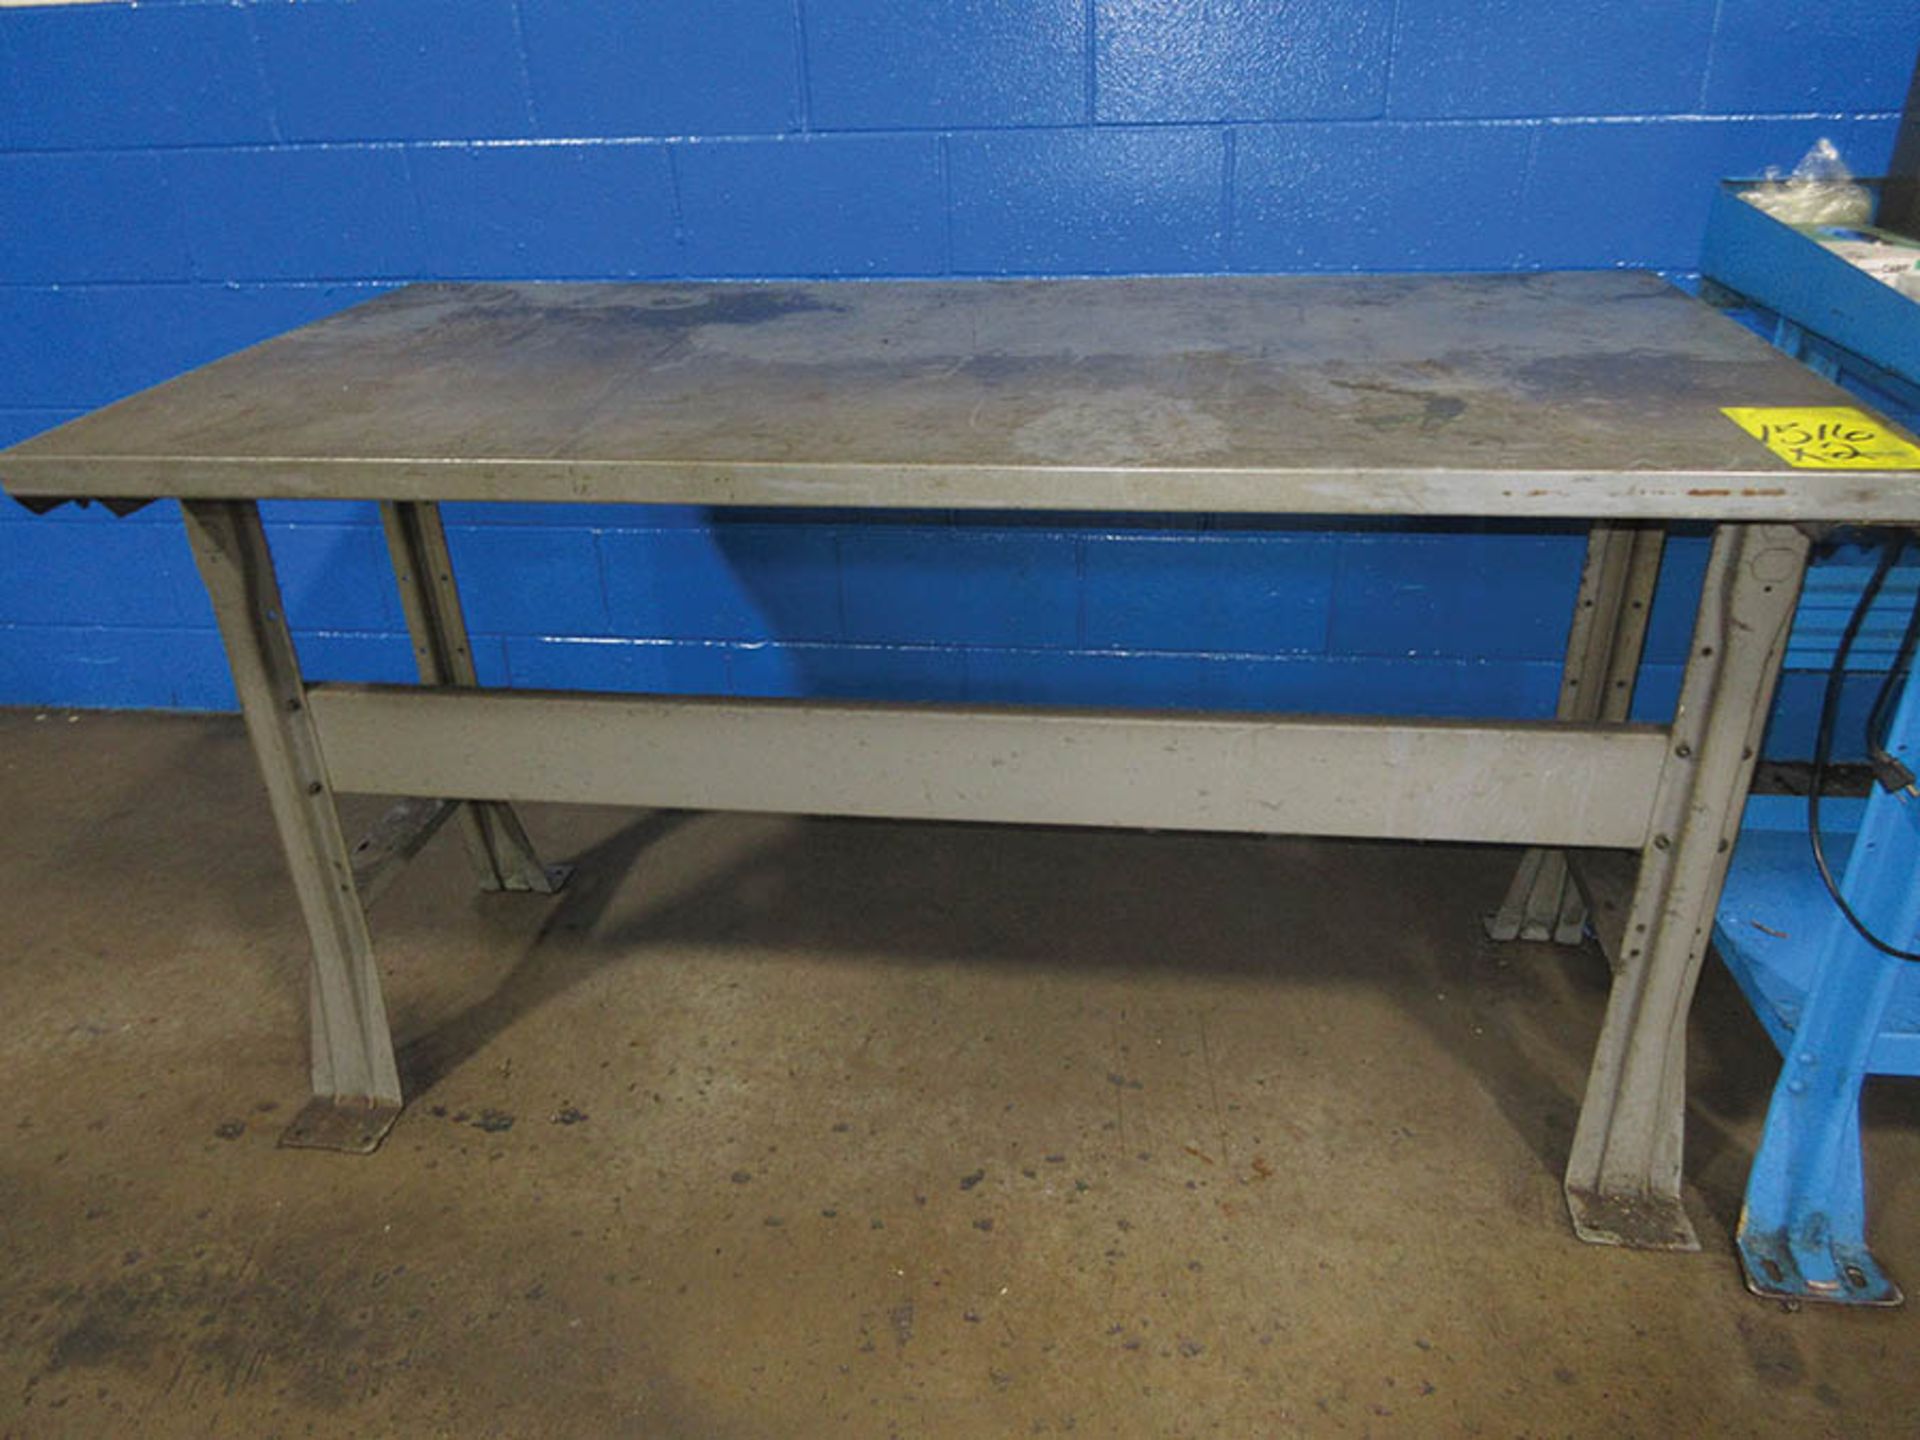 (2) WORKBENCHES, (2) BENCH TOP DRILL/TAPPERS, PARTS BIN AND INSPECTION LIGHTS